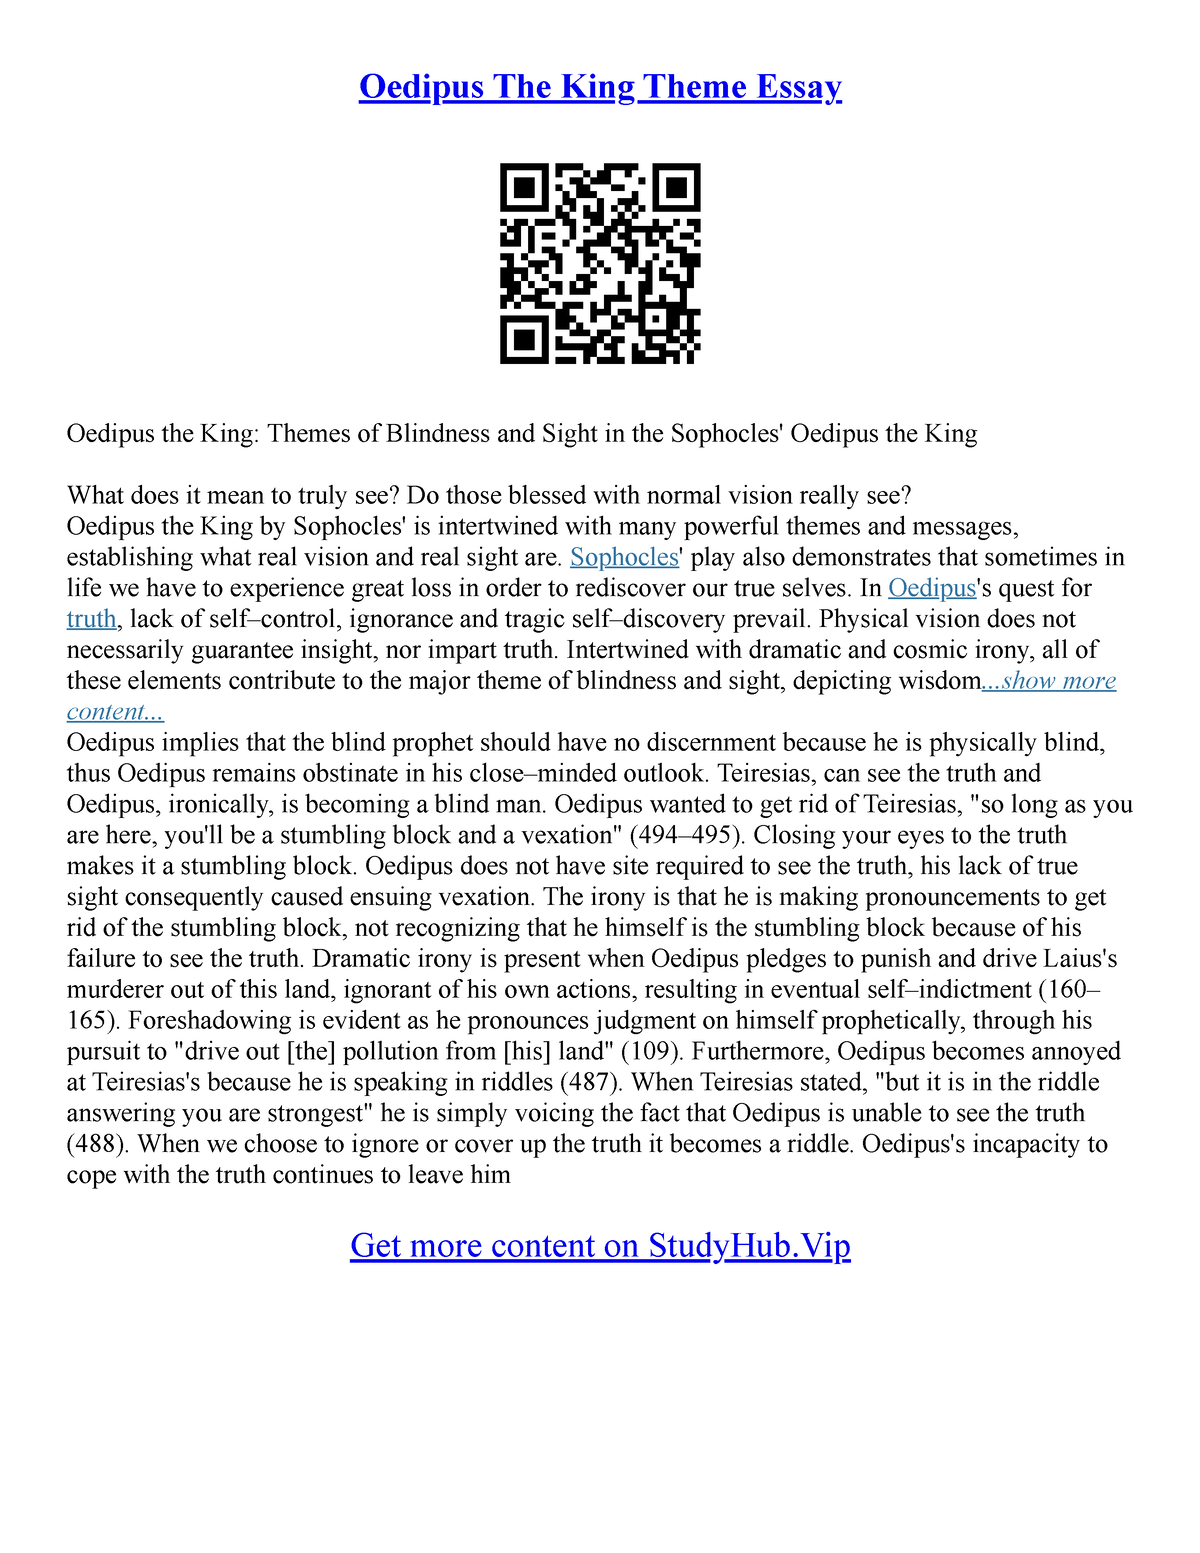 blindness in oedipus the king essay